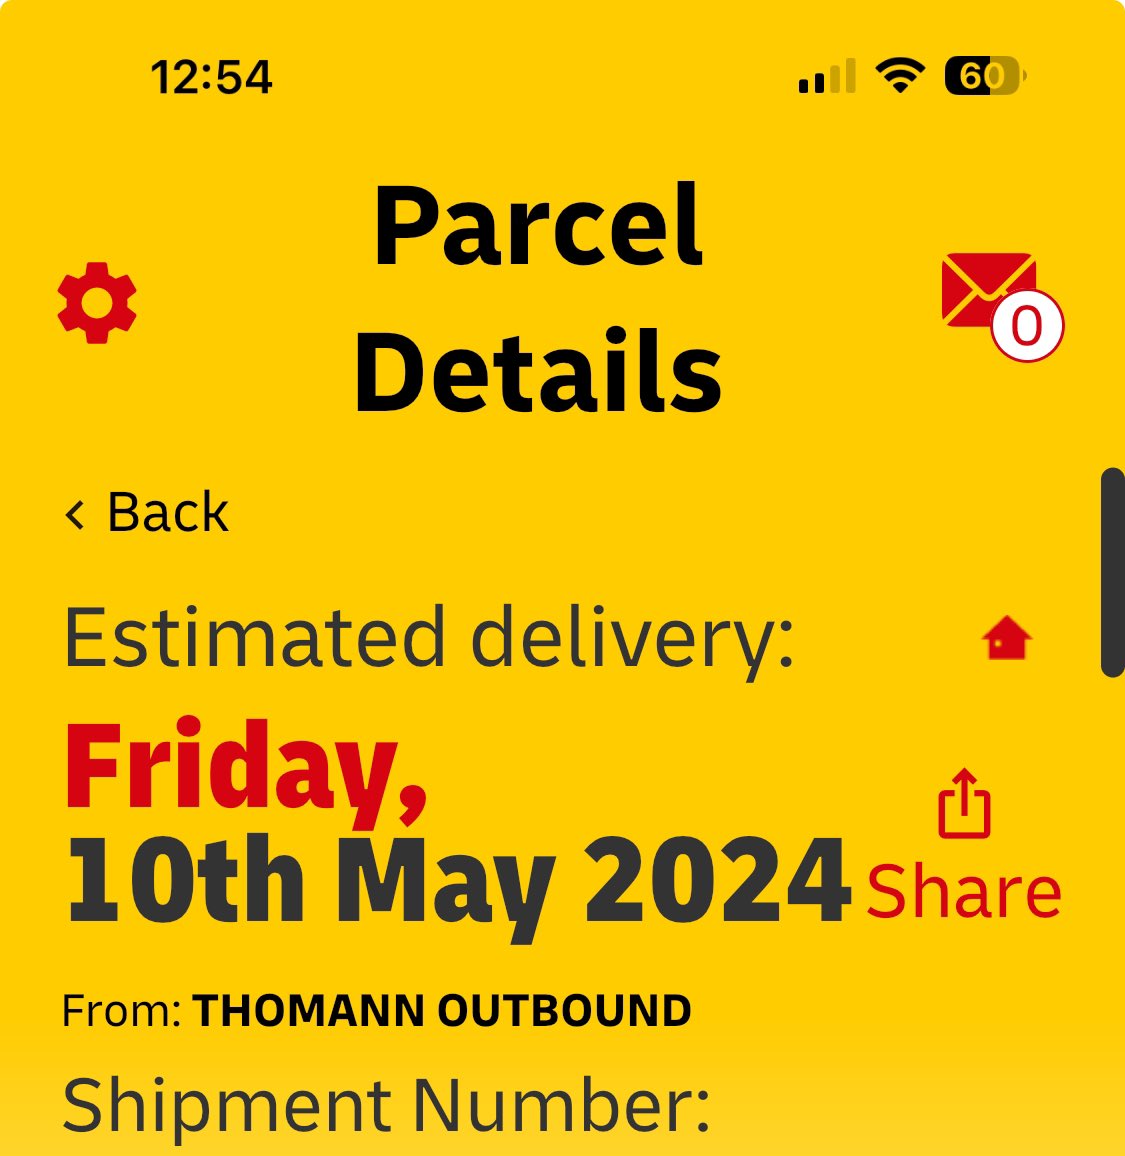 Guessing it hasn’t made it onto today’s lorry either then @DHLParcelUK @dhlexpressuk @DHLGlobal 

No update and no answers to my queries - what a shitshow 😡

@thomann - you should be ashamed of this and your customer service just shrugging your shoulders 🤷🏻‍♂️